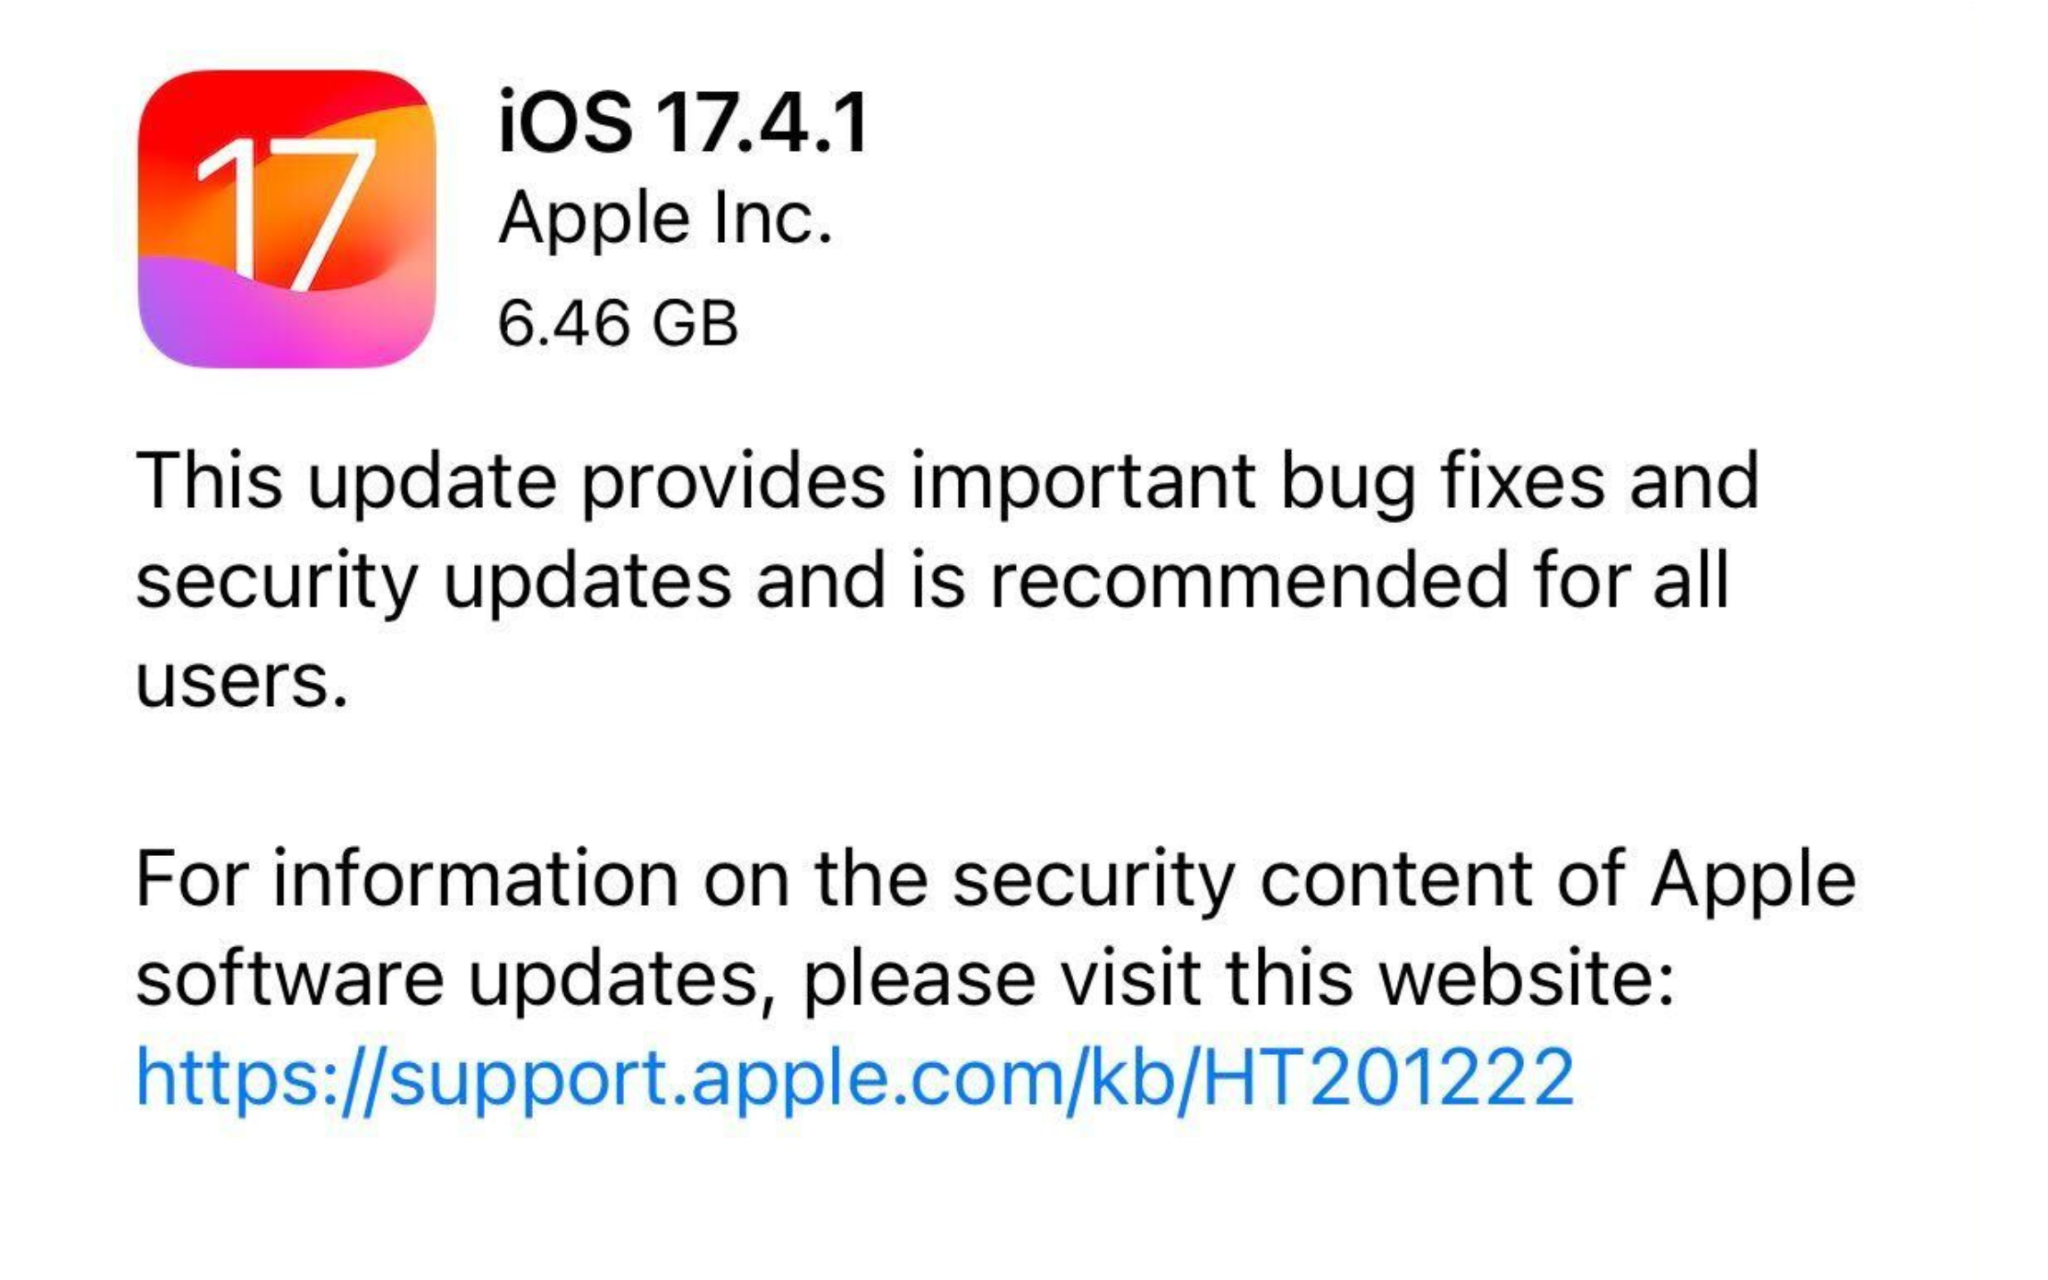 ❤ Why Apple is being vague with iOS 17.4.1 details